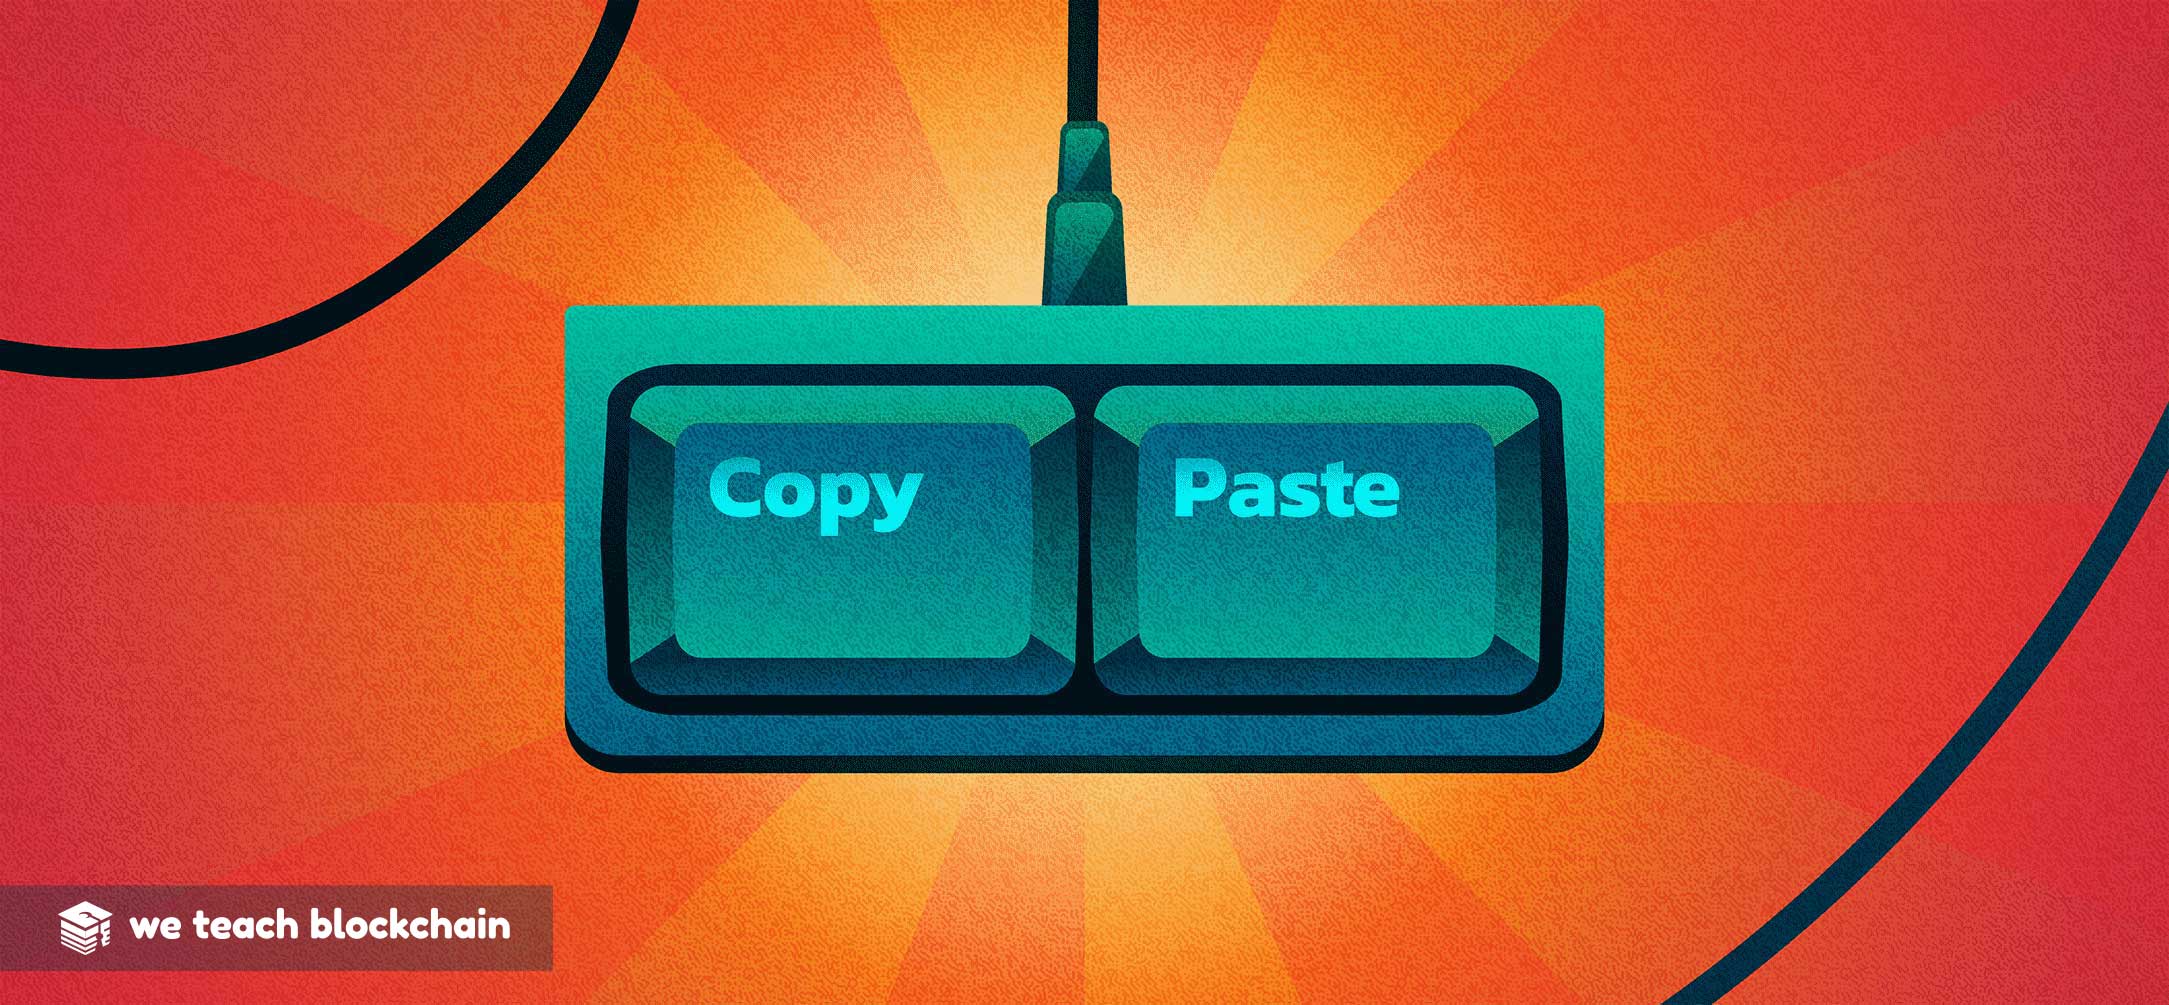 Image of keyboard keys labelled 'Copy' and 'Paste'